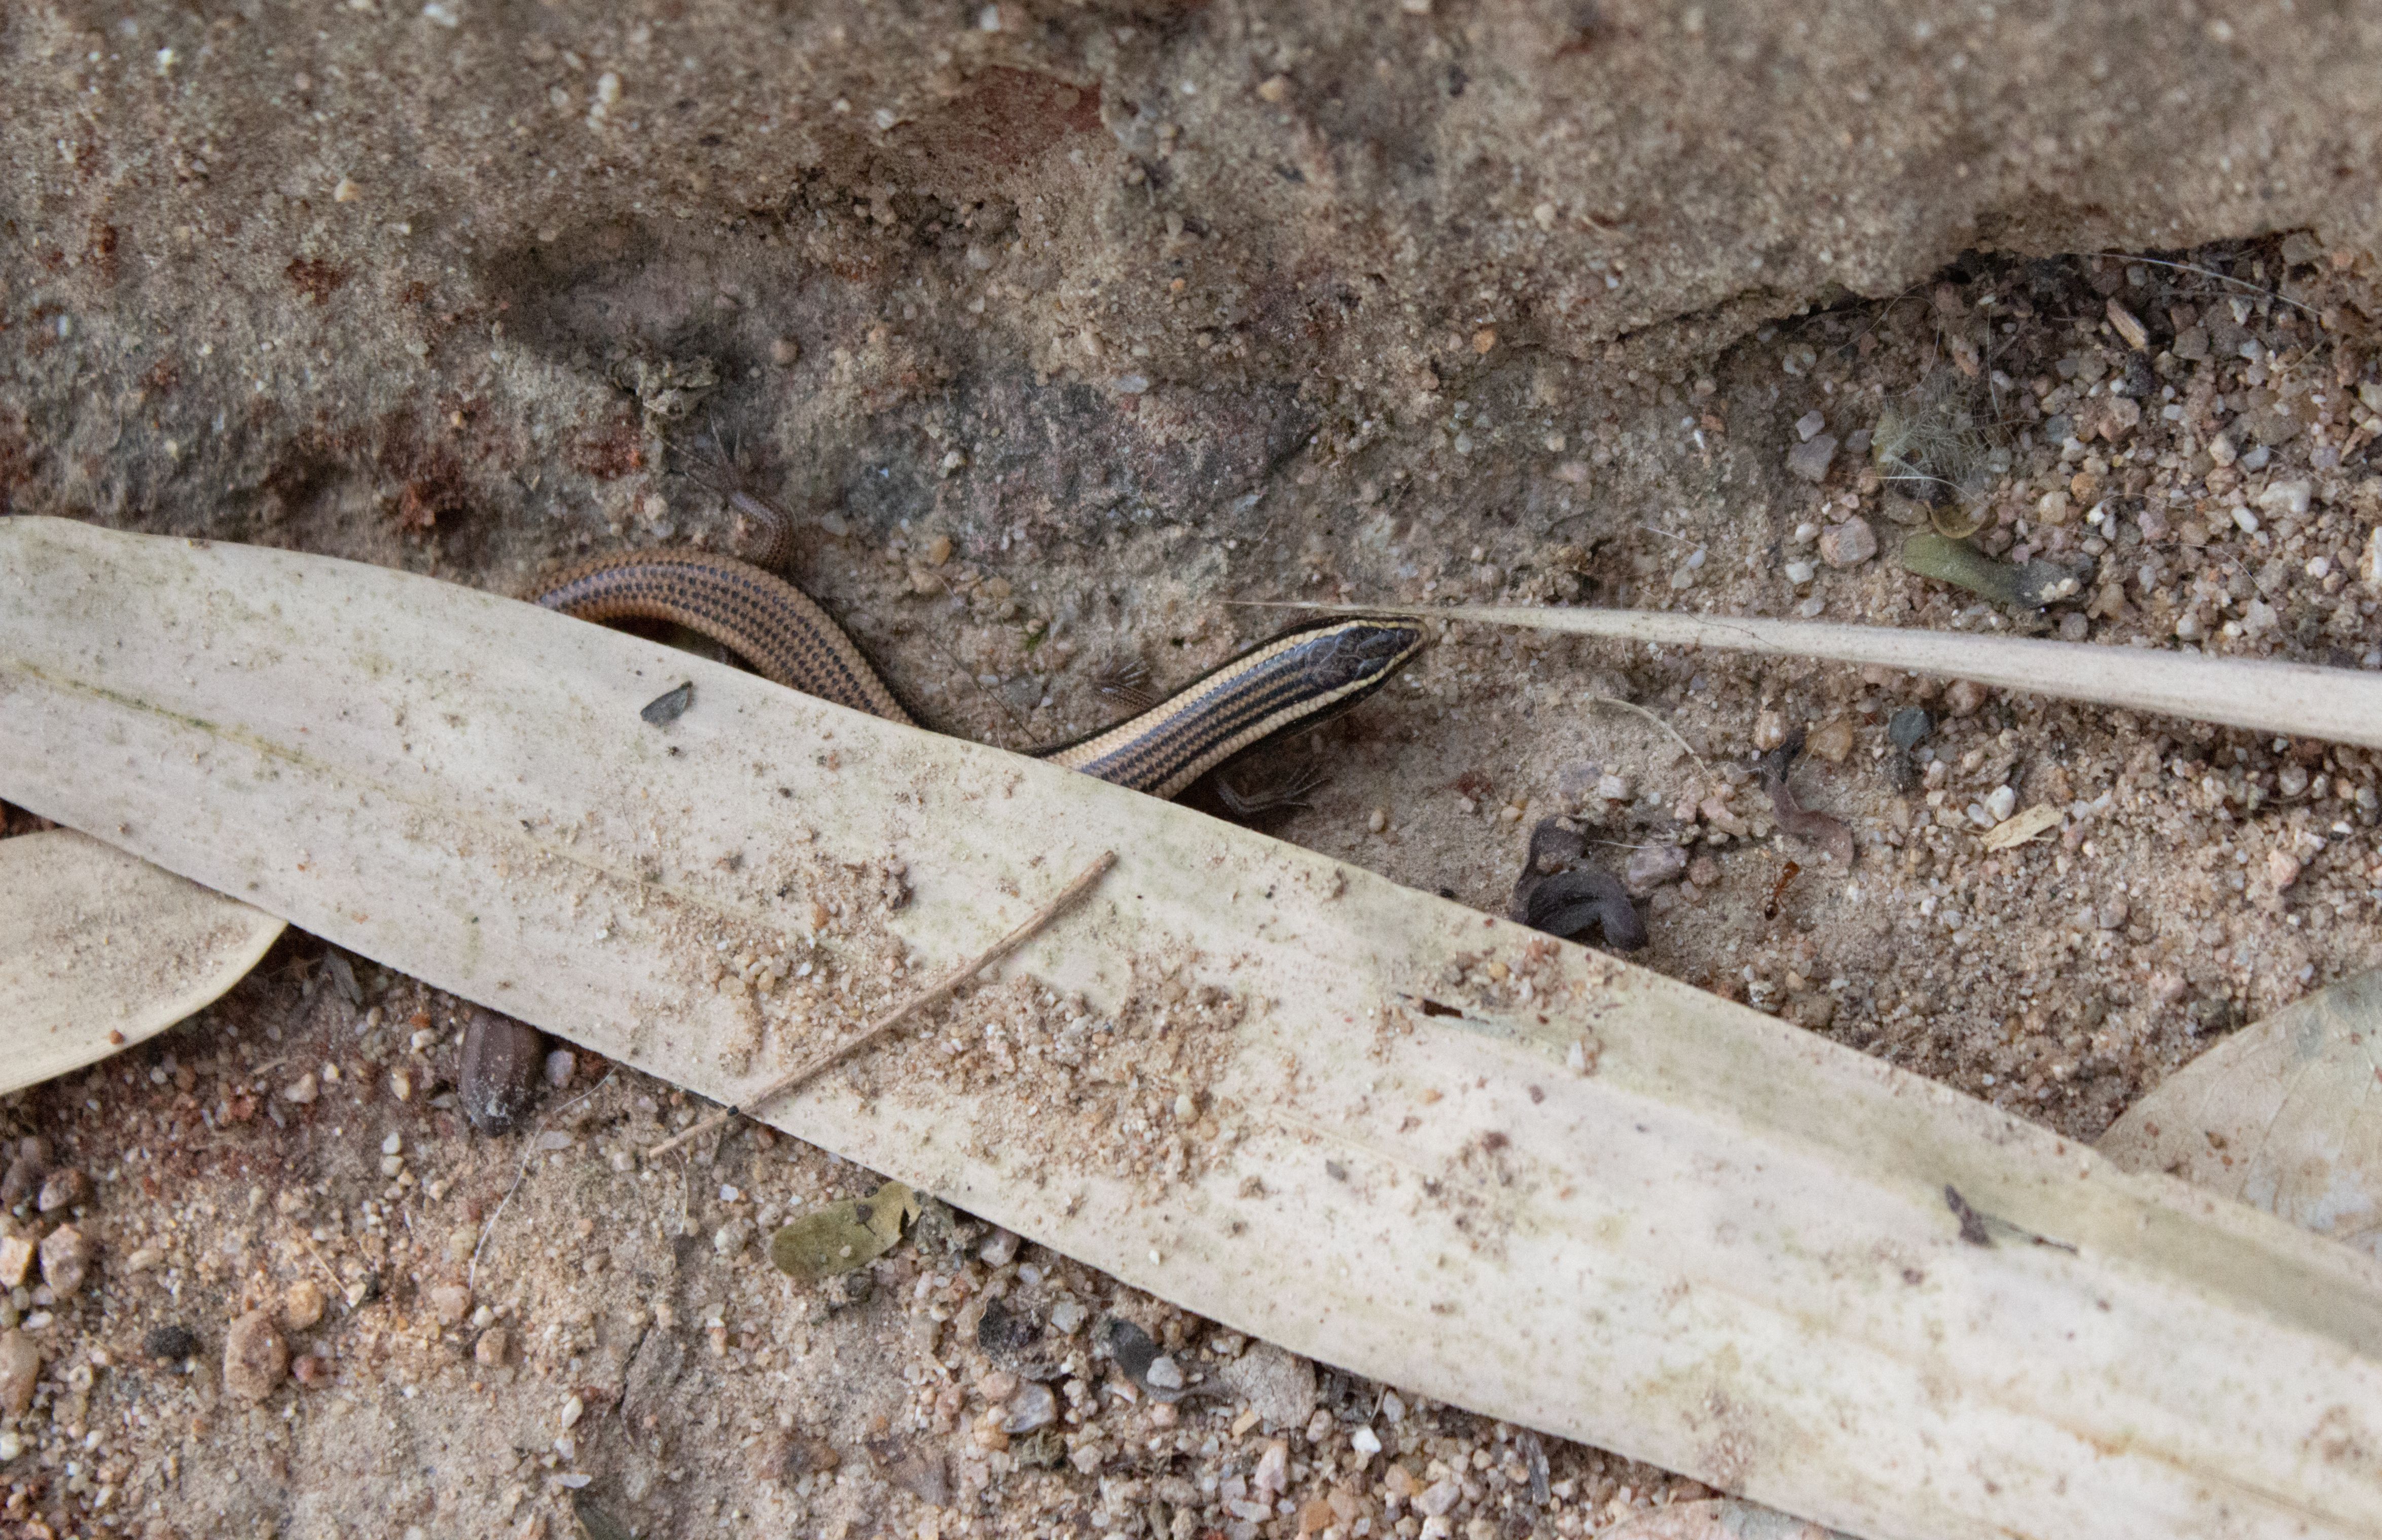 A Spotted Supple Skink Riopa Punctata Flipped Under A Concrete Slab At Kbr Park Hyderabad